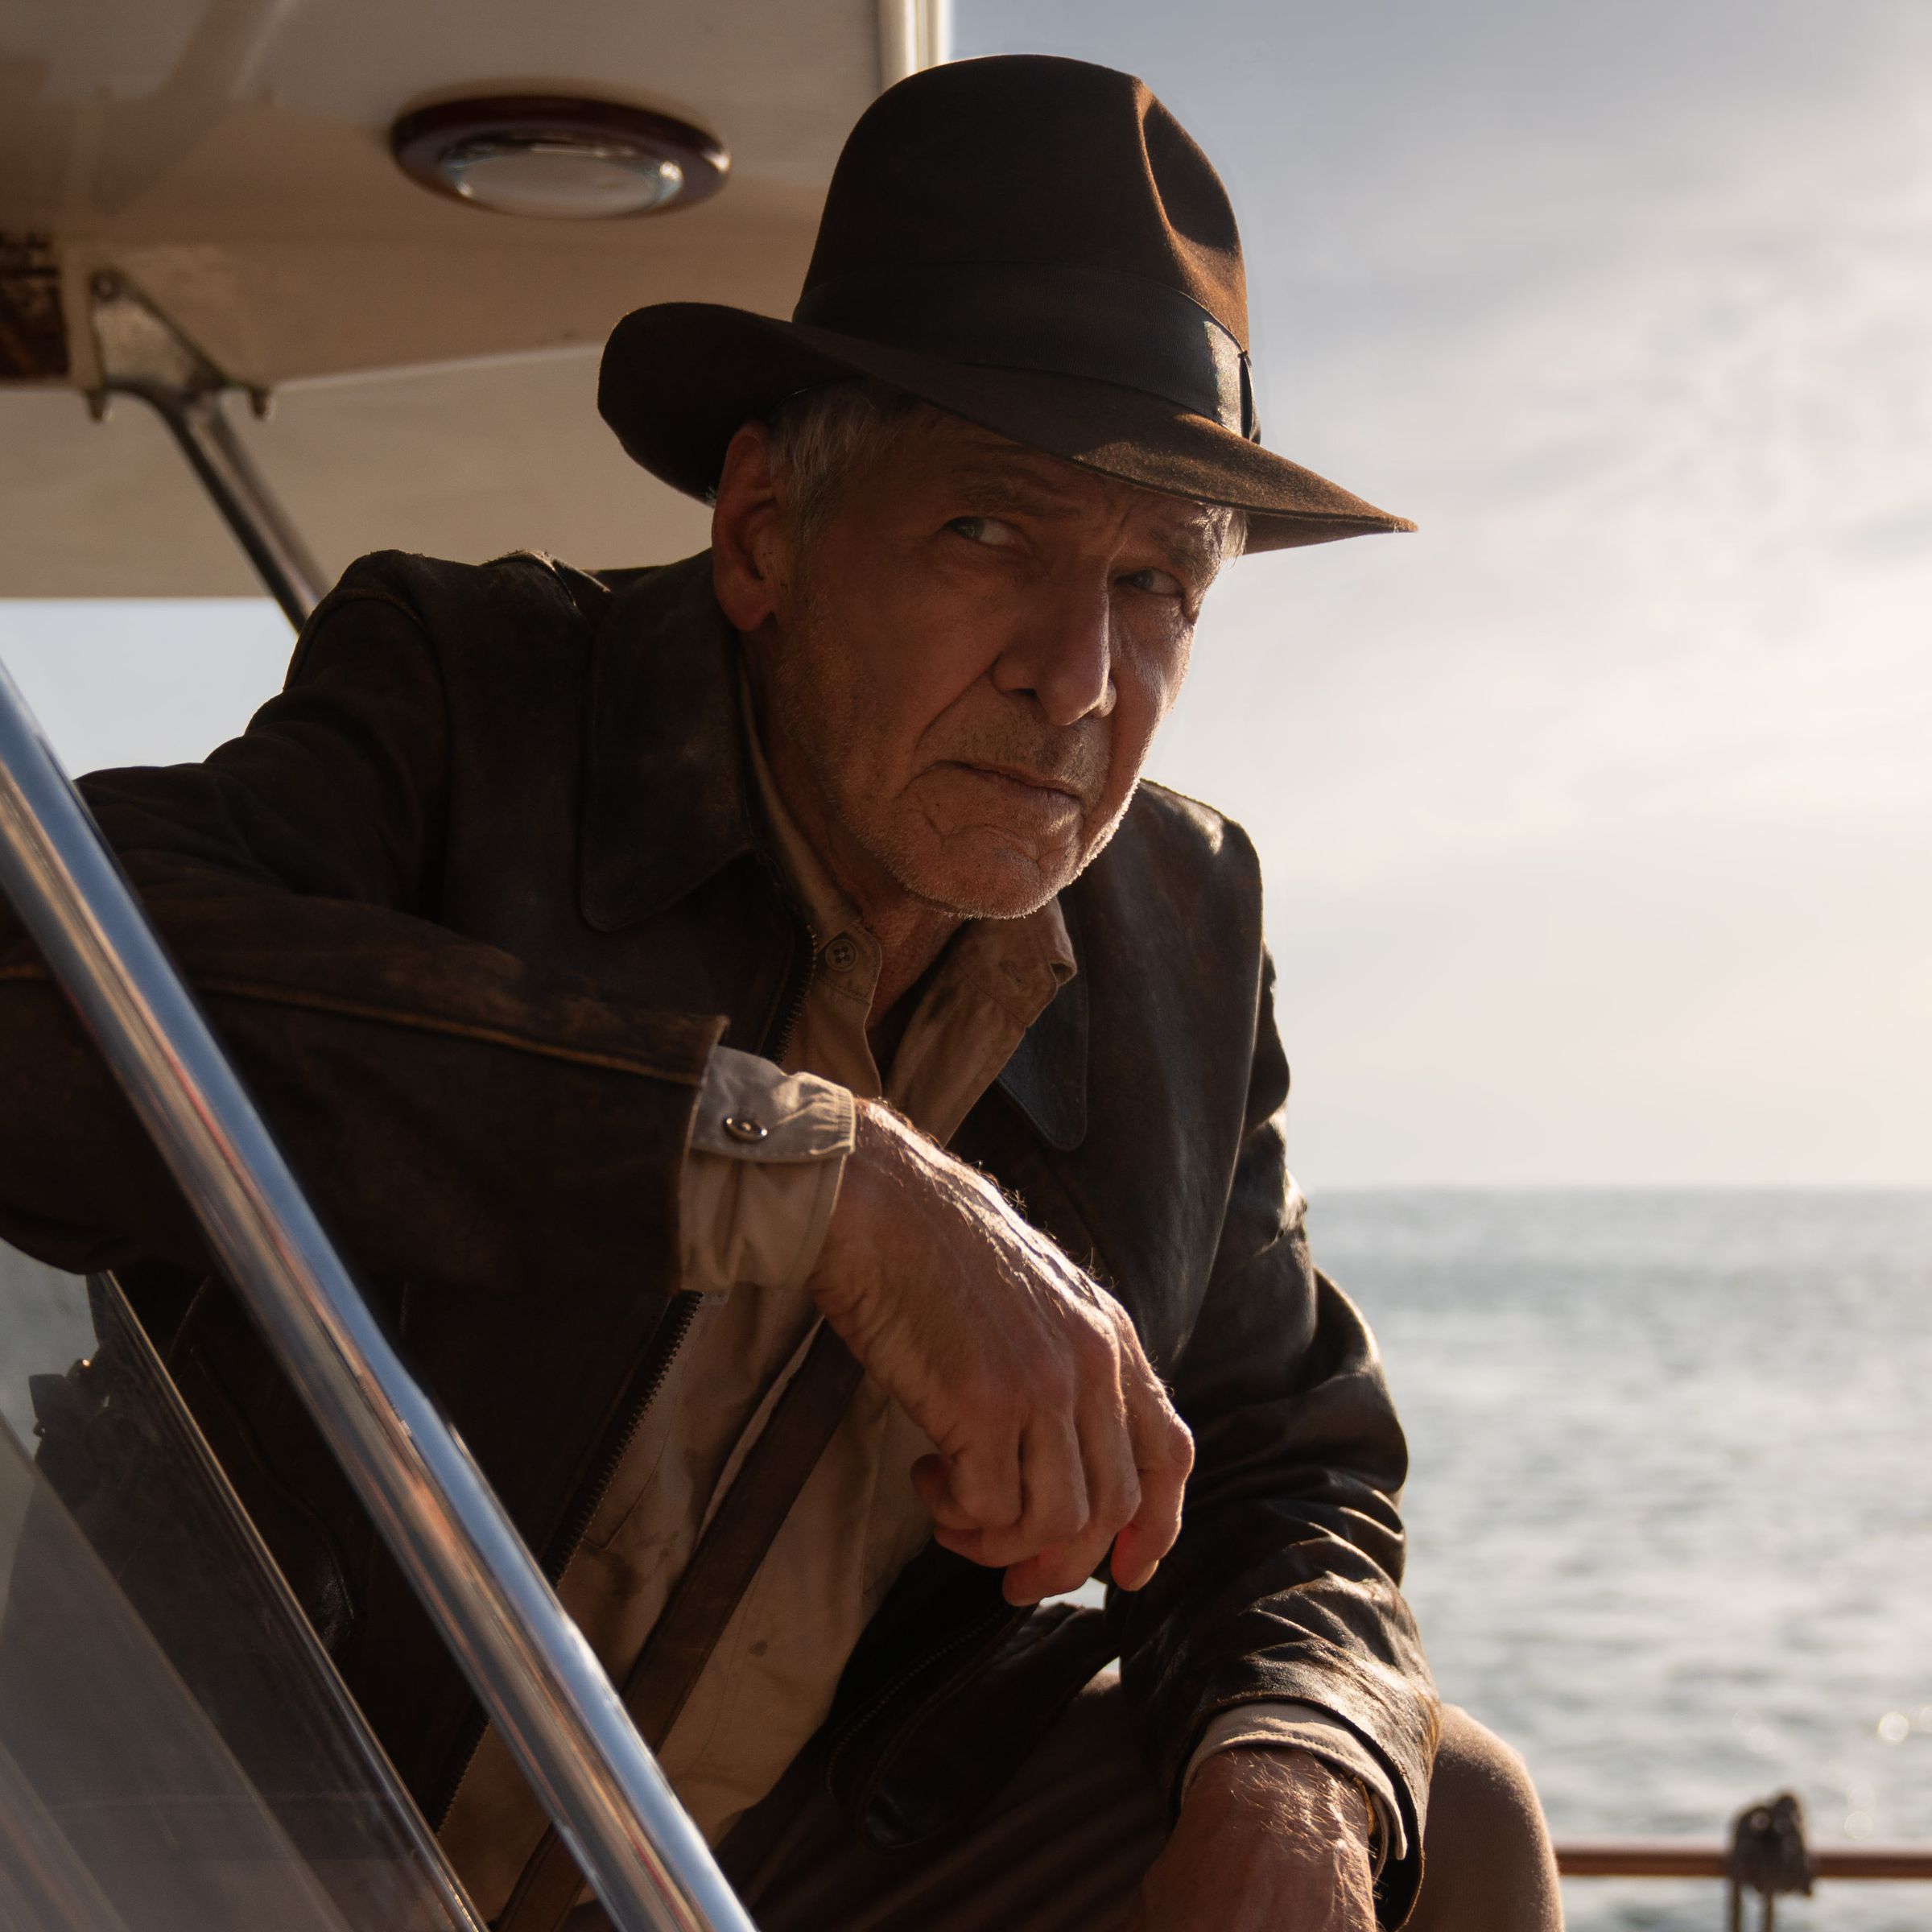 A mean wearing a fedora, shirt, and jacket. The man is leaning out of an opening on the deck of a boat.